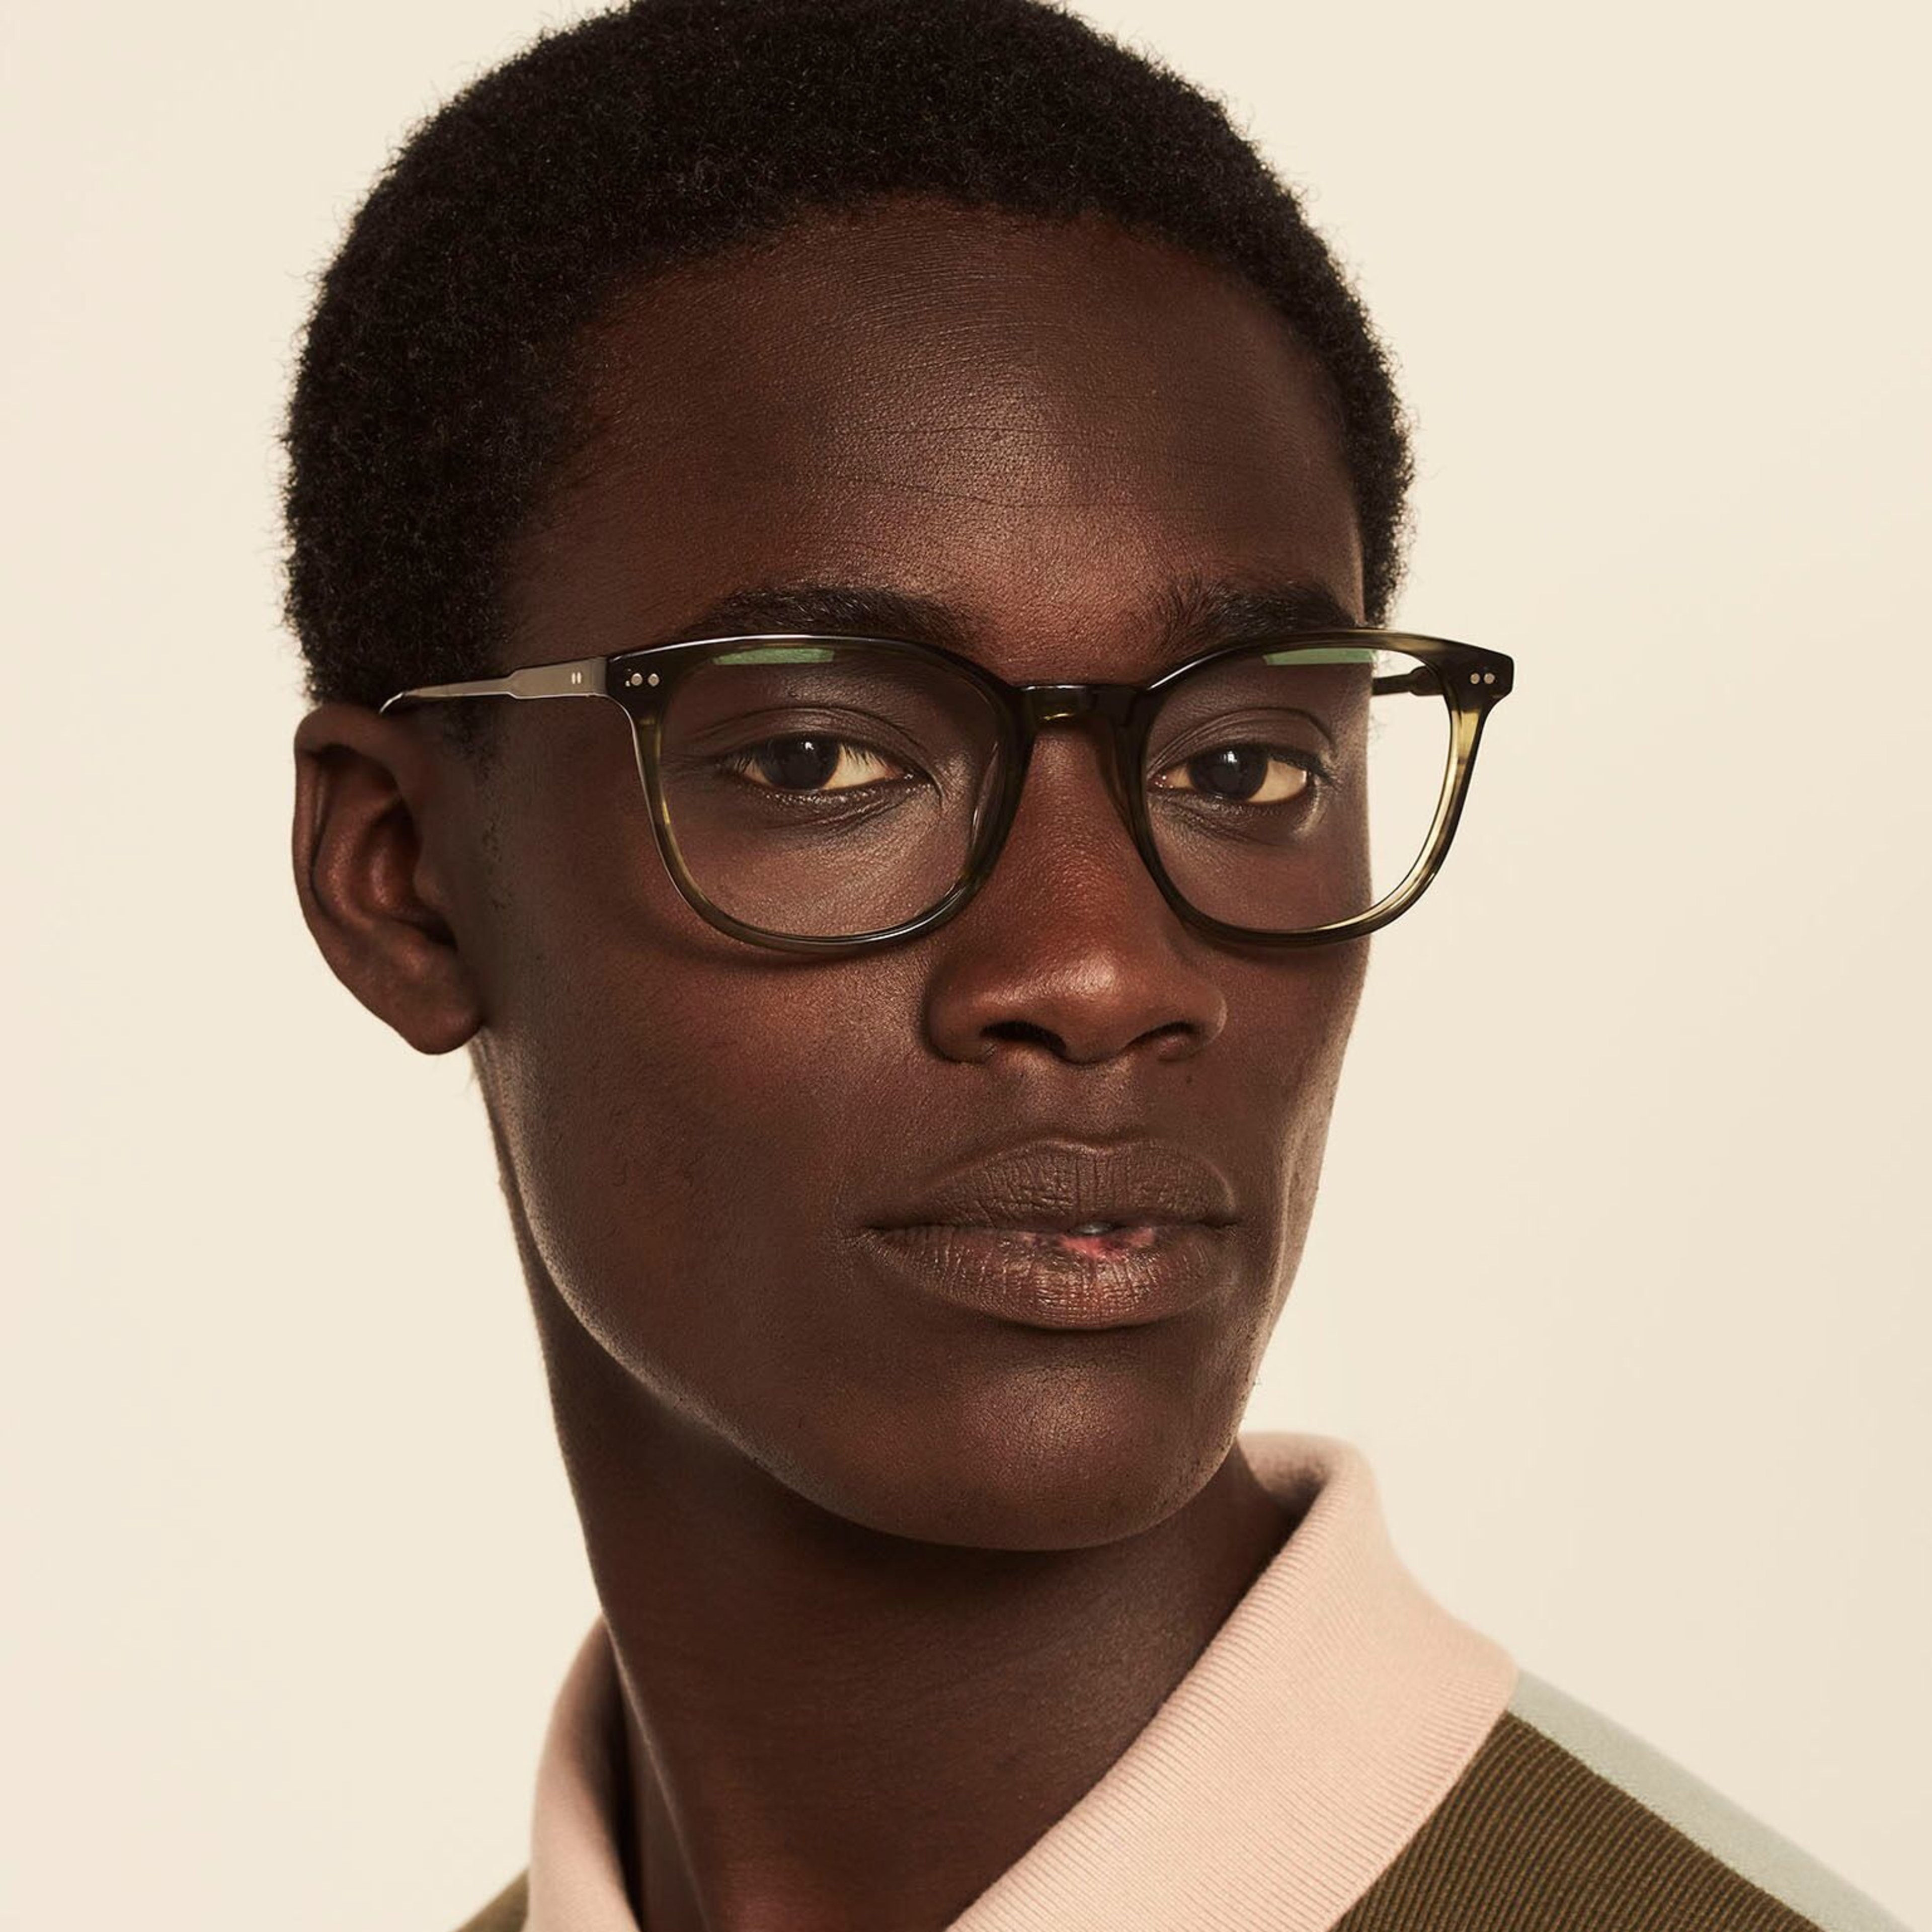 Ace & Tate Glasses | round acetate in Green